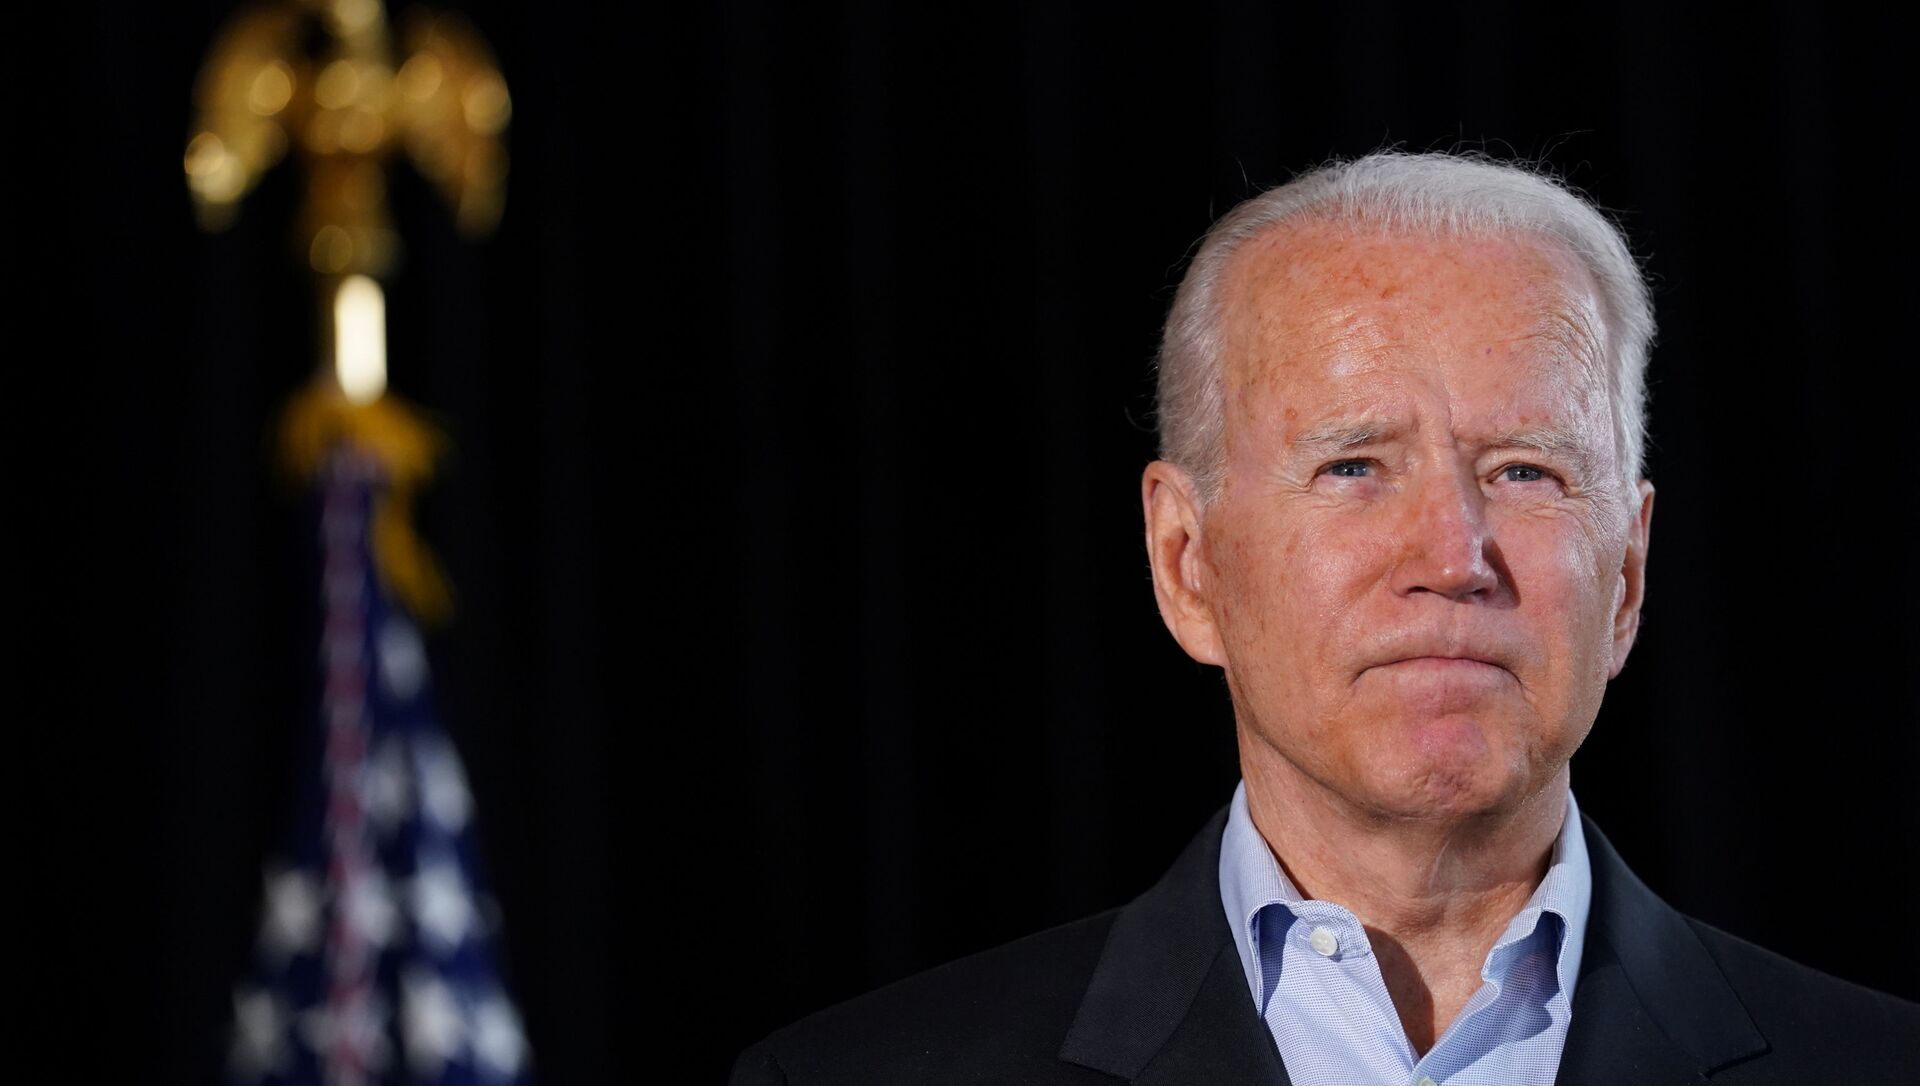 U.S. President Joe Biden gestures as he delivers remarks after speaking to family members whose loved ones died or are missing after the building collapse in Surfside in Miami, Florida U.S., July 1, 2021 - Sputnik International, 1920, 05.07.2021